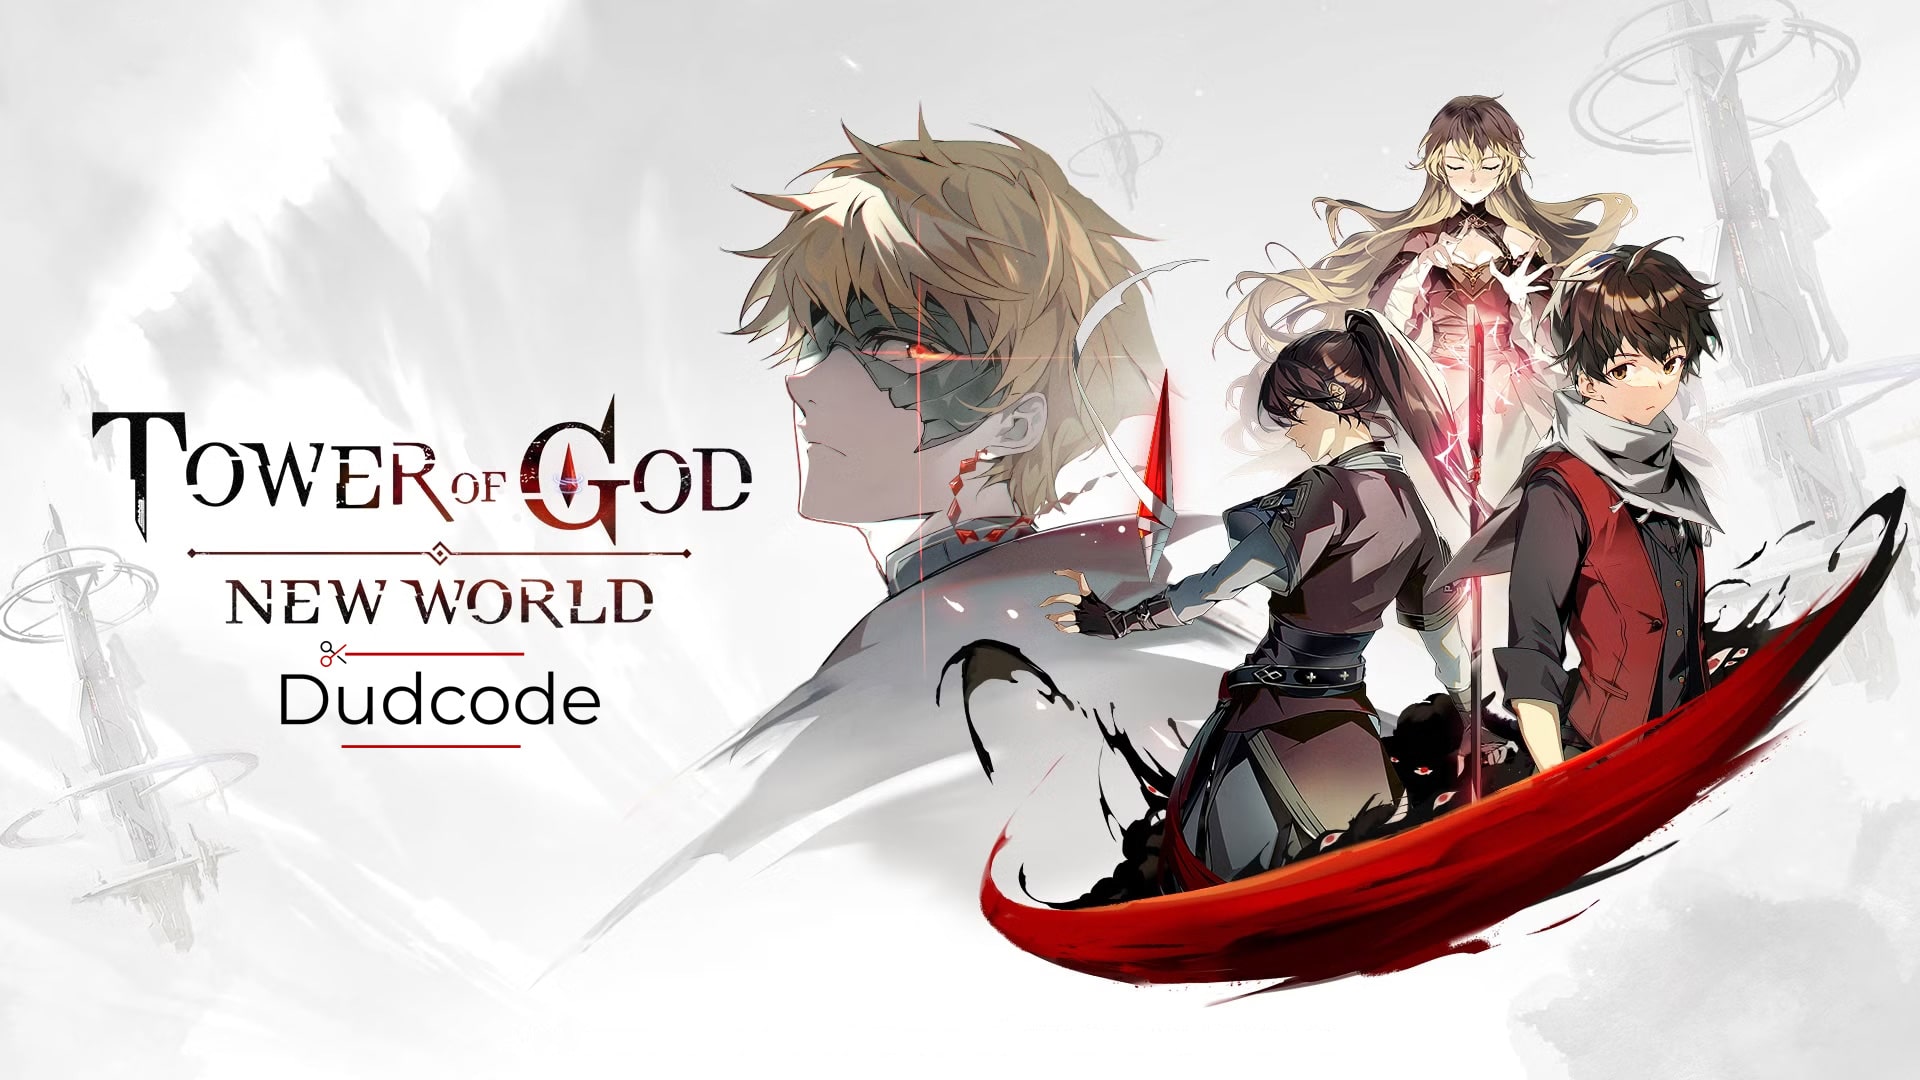 Tower of God Codes